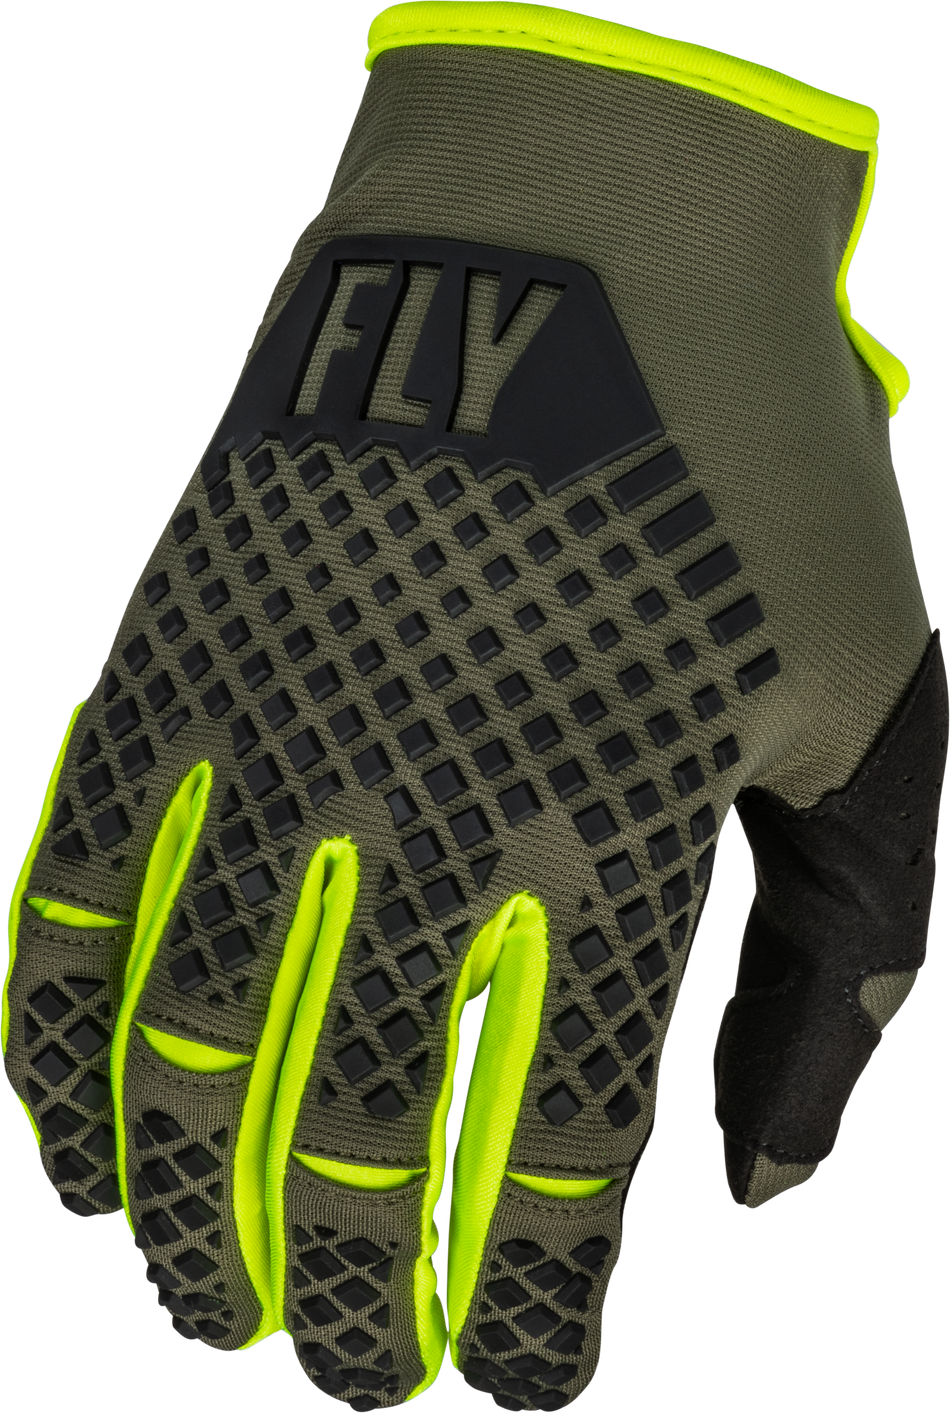 FLY RACING Youth Kinetic Gloves Olive Green/Hi-Vis Ys 376-413YS